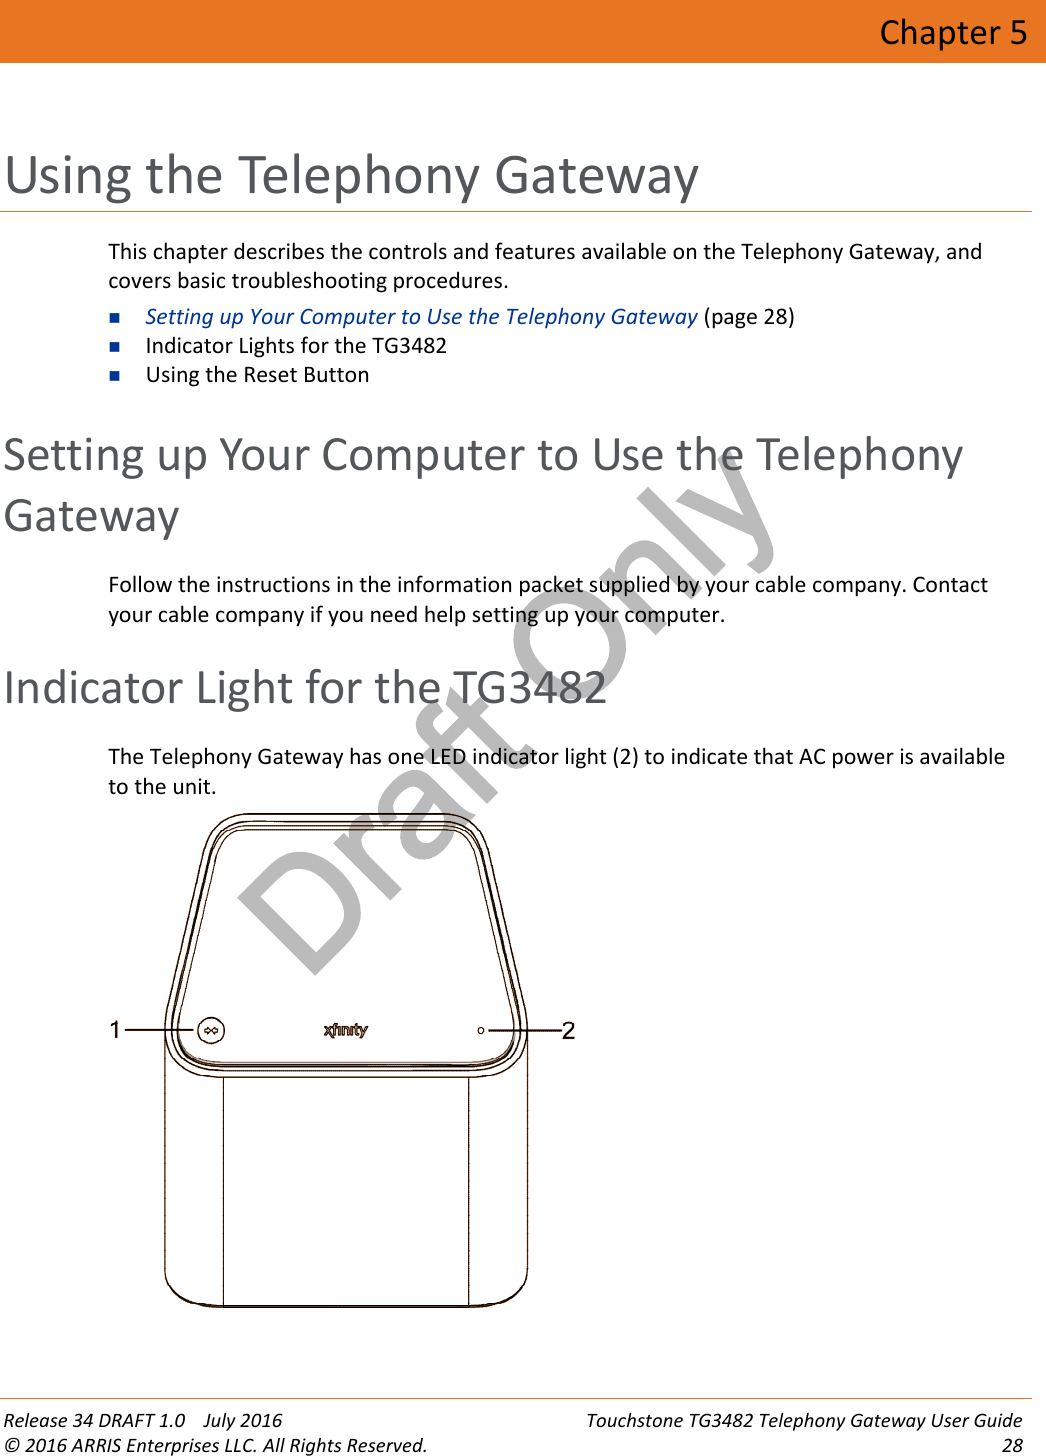 Draft OnlyRelease 34 DRAFT 1.0 July 2016 Touchstone TG3482 Telephony Gateway User Guide© 2016 ARRIS Enterprises LLC. All Rights Reserved. 28Chapter 5Using the Telephony GatewayThis chapter describes the controls and features available on the Telephony Gateway, andcovers basic troubleshooting procedures.Setting up Your Computer to Use the Telephony Gateway (page 28)Indicator Lights for the TG3482Using the Reset ButtonSetting up Your Computer to Use the TelephonyGatewayFollow the instructions in the information packet supplied by your cable company. Contactyour cable company if you need help setting up your computer.Indicator Light for the TG3482The Telephony Gateway has one LED indicator light (2) to indicate that AC power is availableto the unit.